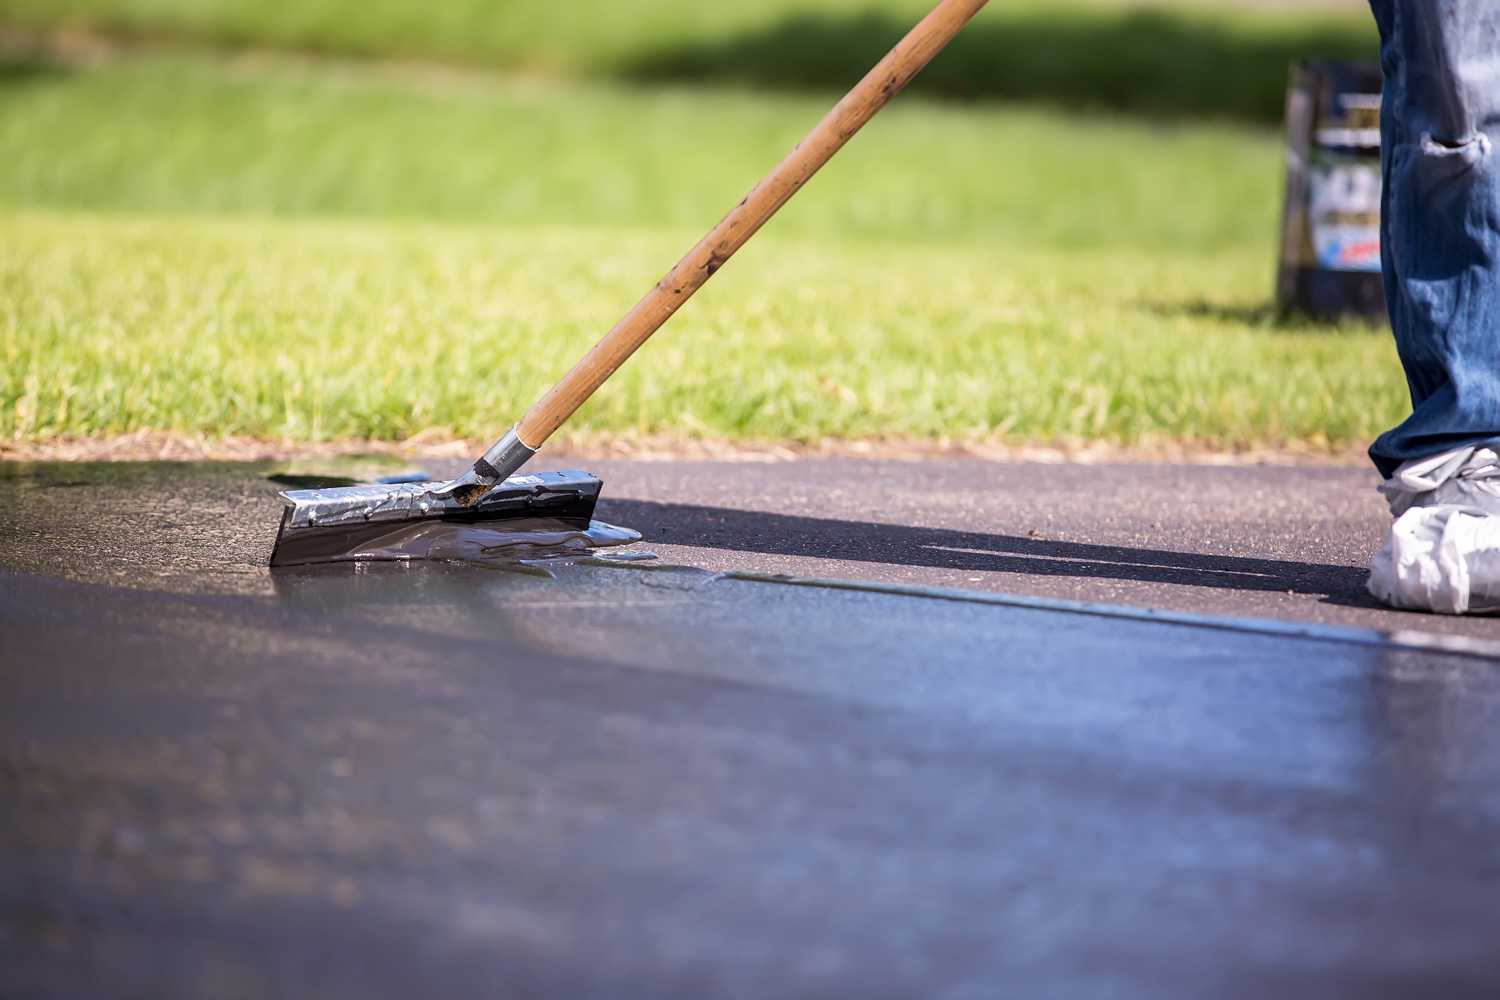 Close-up of a home owner seal coating their own driveway. They are using the "broom" to spread out the sealer on the driveway.